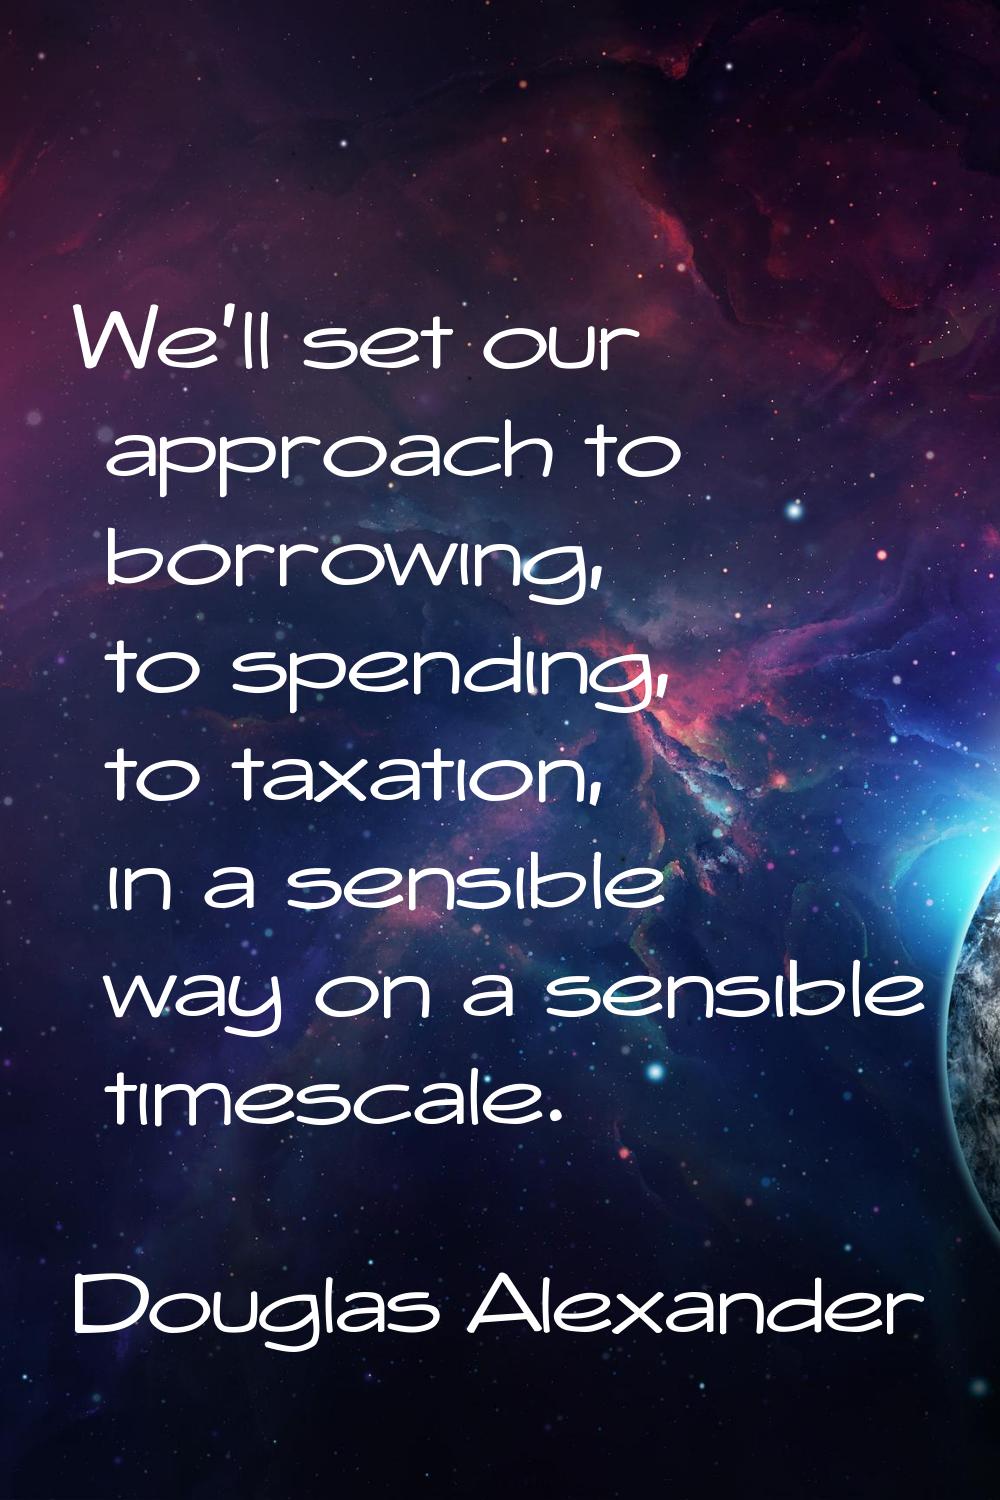 We'll set our approach to borrowing, to spending, to taxation, in a sensible way on a sensible time